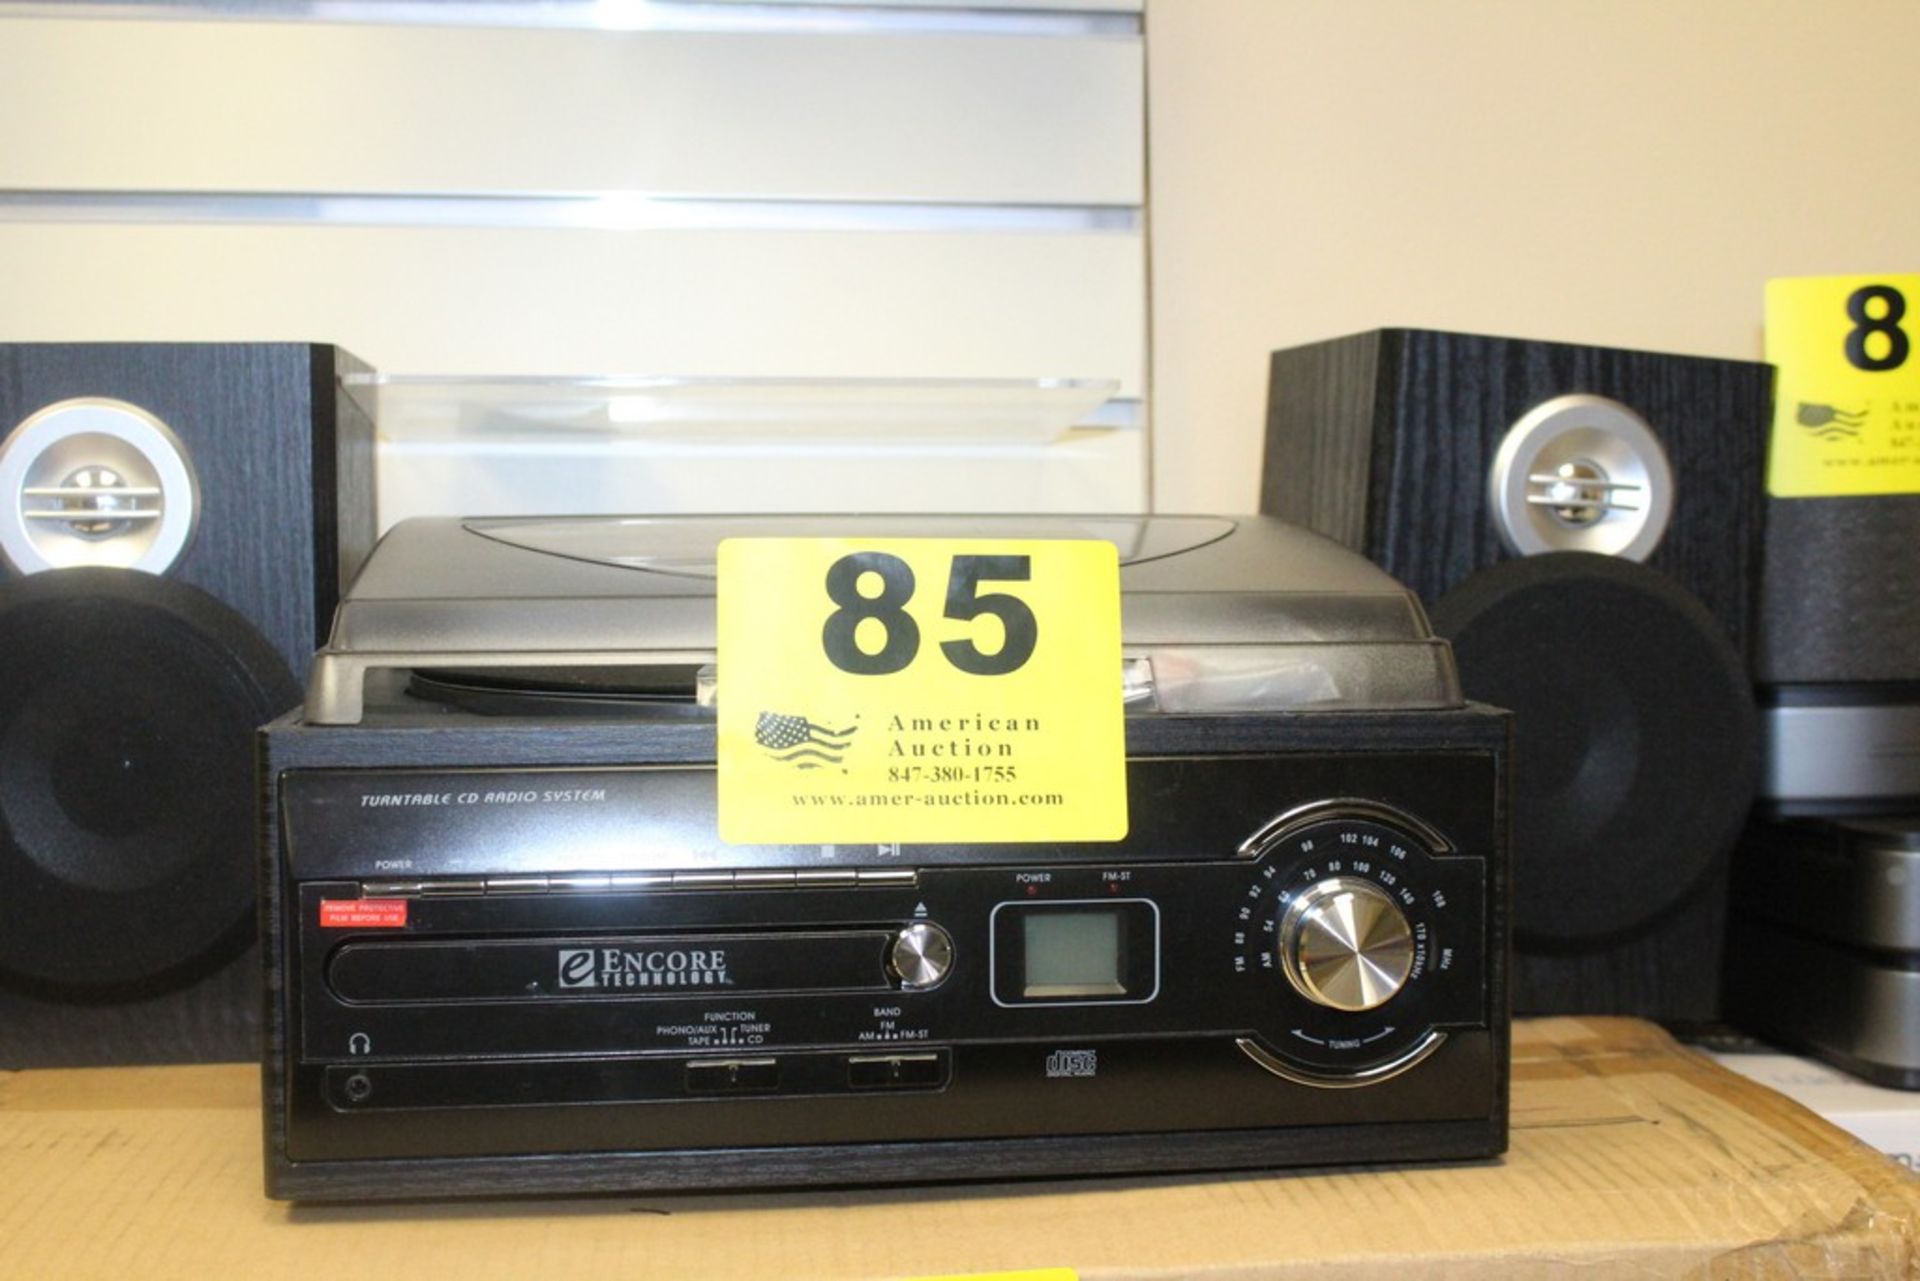 ENCORE TECHNOLOGY MODEL 9282CMO CD PLAYER WITH TURNTABLE, CASSETTE, STEREO AM/FM RADIO AND SPEAKERS